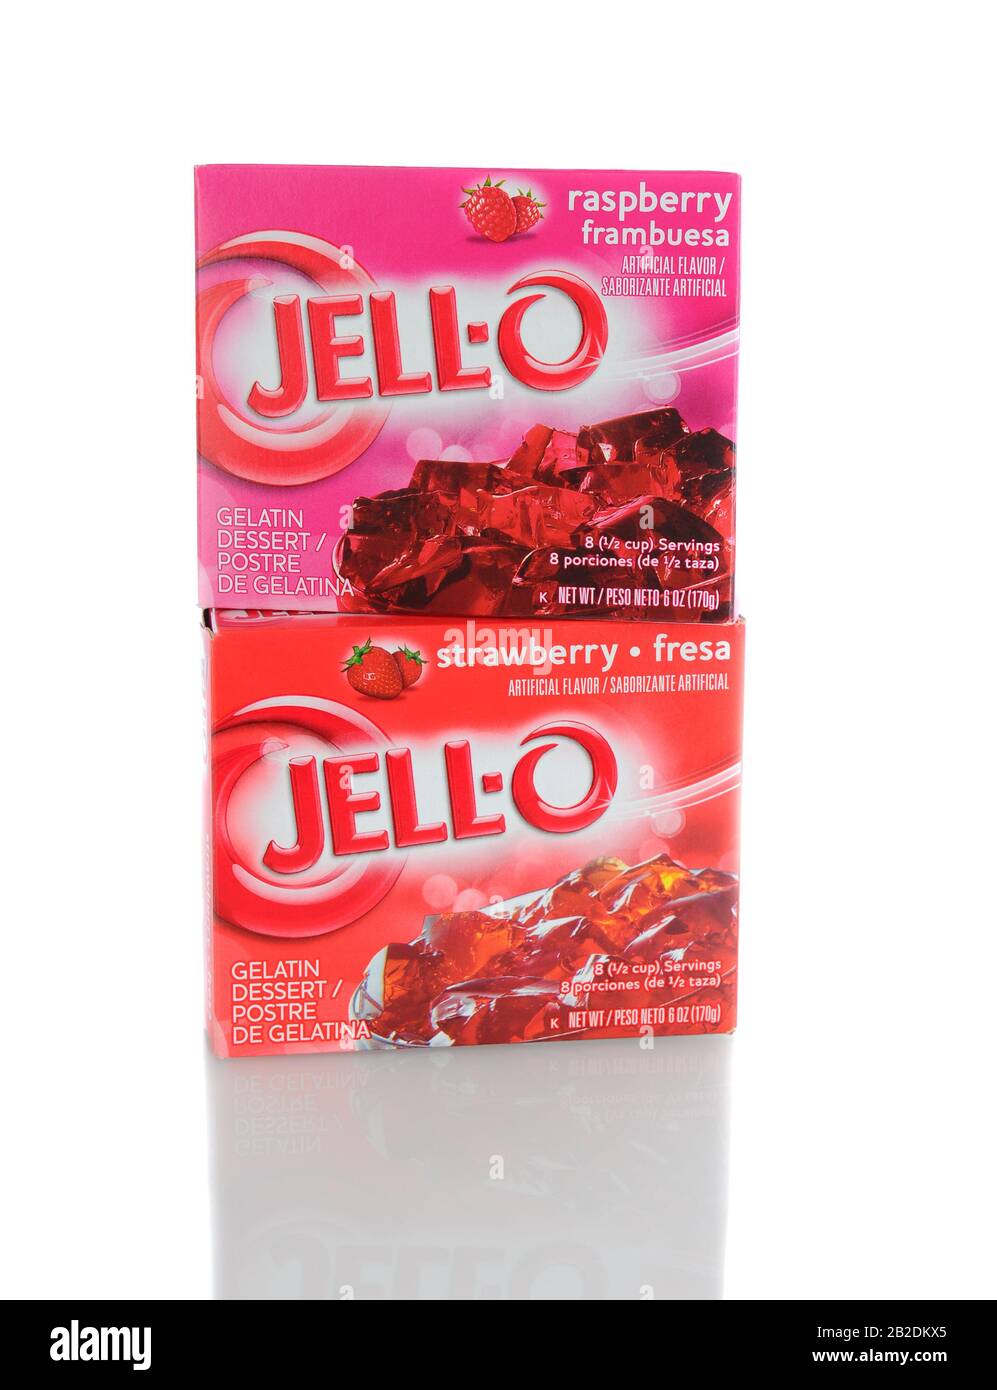 Jello Box High Resolution Stock Photography and Images - Alamy